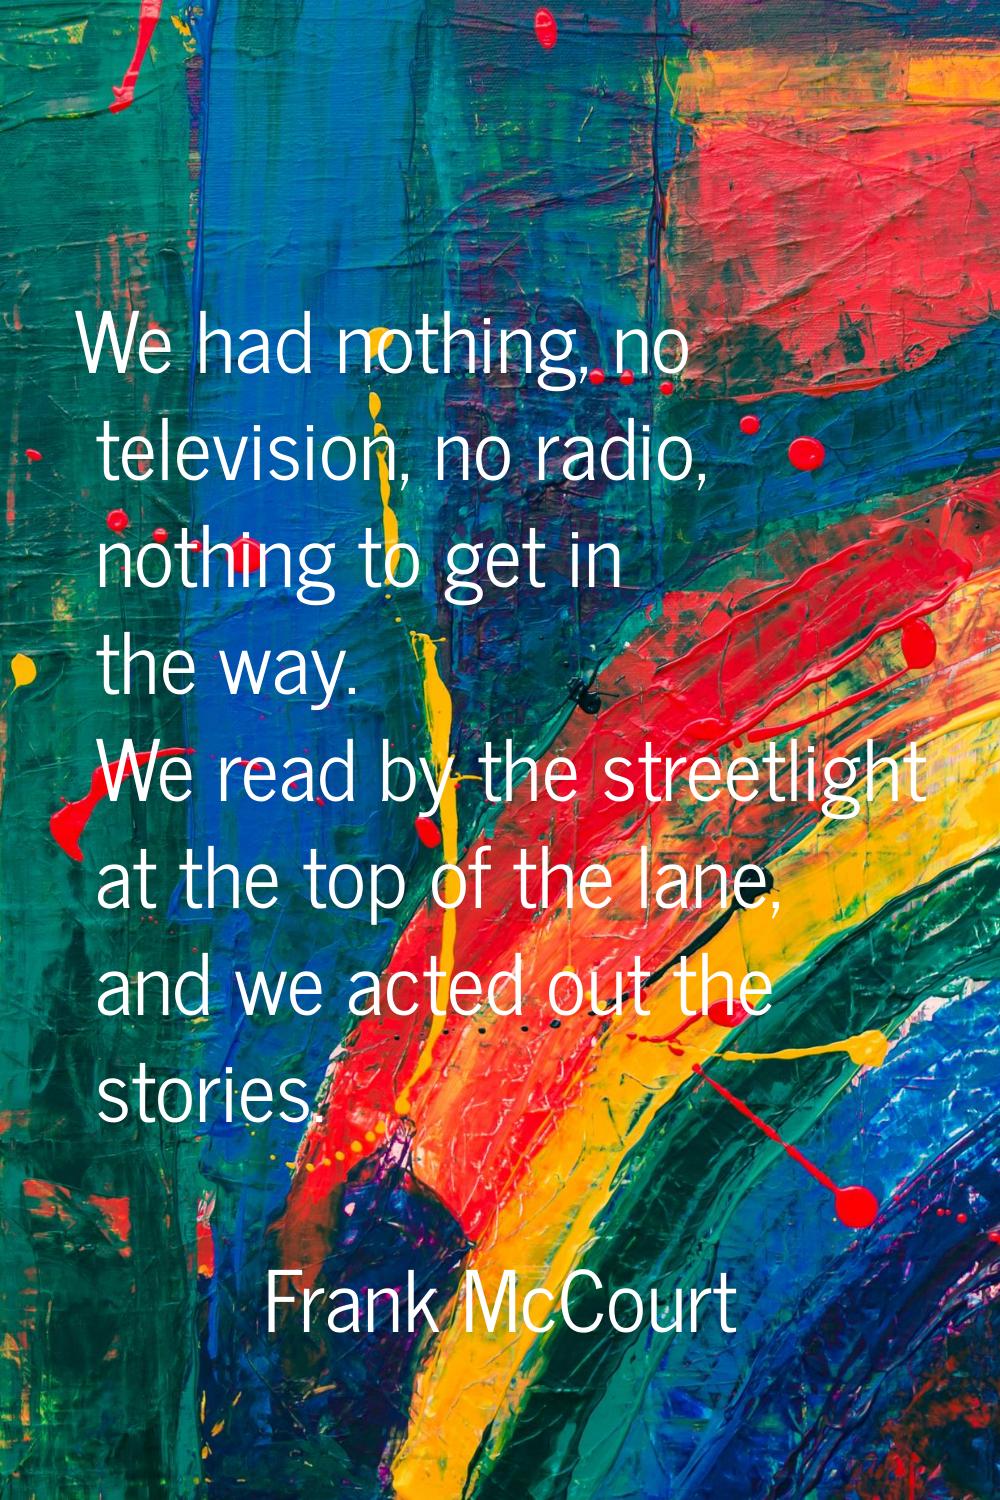 We had nothing, no television, no radio, nothing to get in the way. We read by the streetlight at t